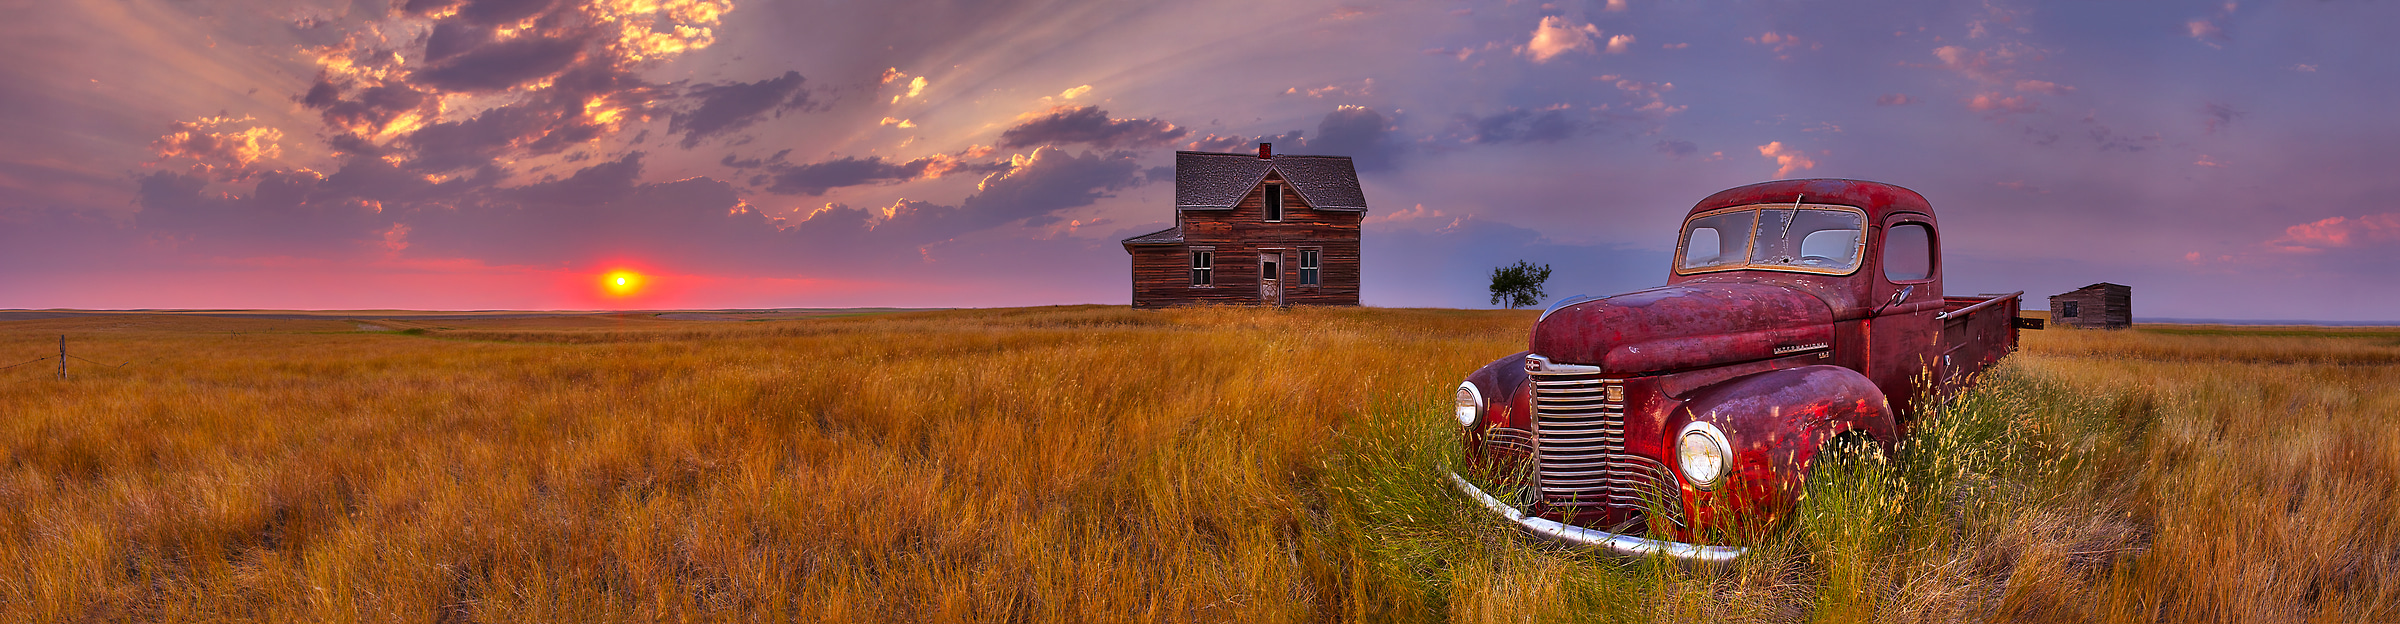 105 megapixels! A very high resolution, large-format VAST photo of farmland, the prairie, an old truck, and an abandoned house; fine art landscape photo created at sunset by Scott Dimond on the Great Plains in Saskatchewan, Canada.